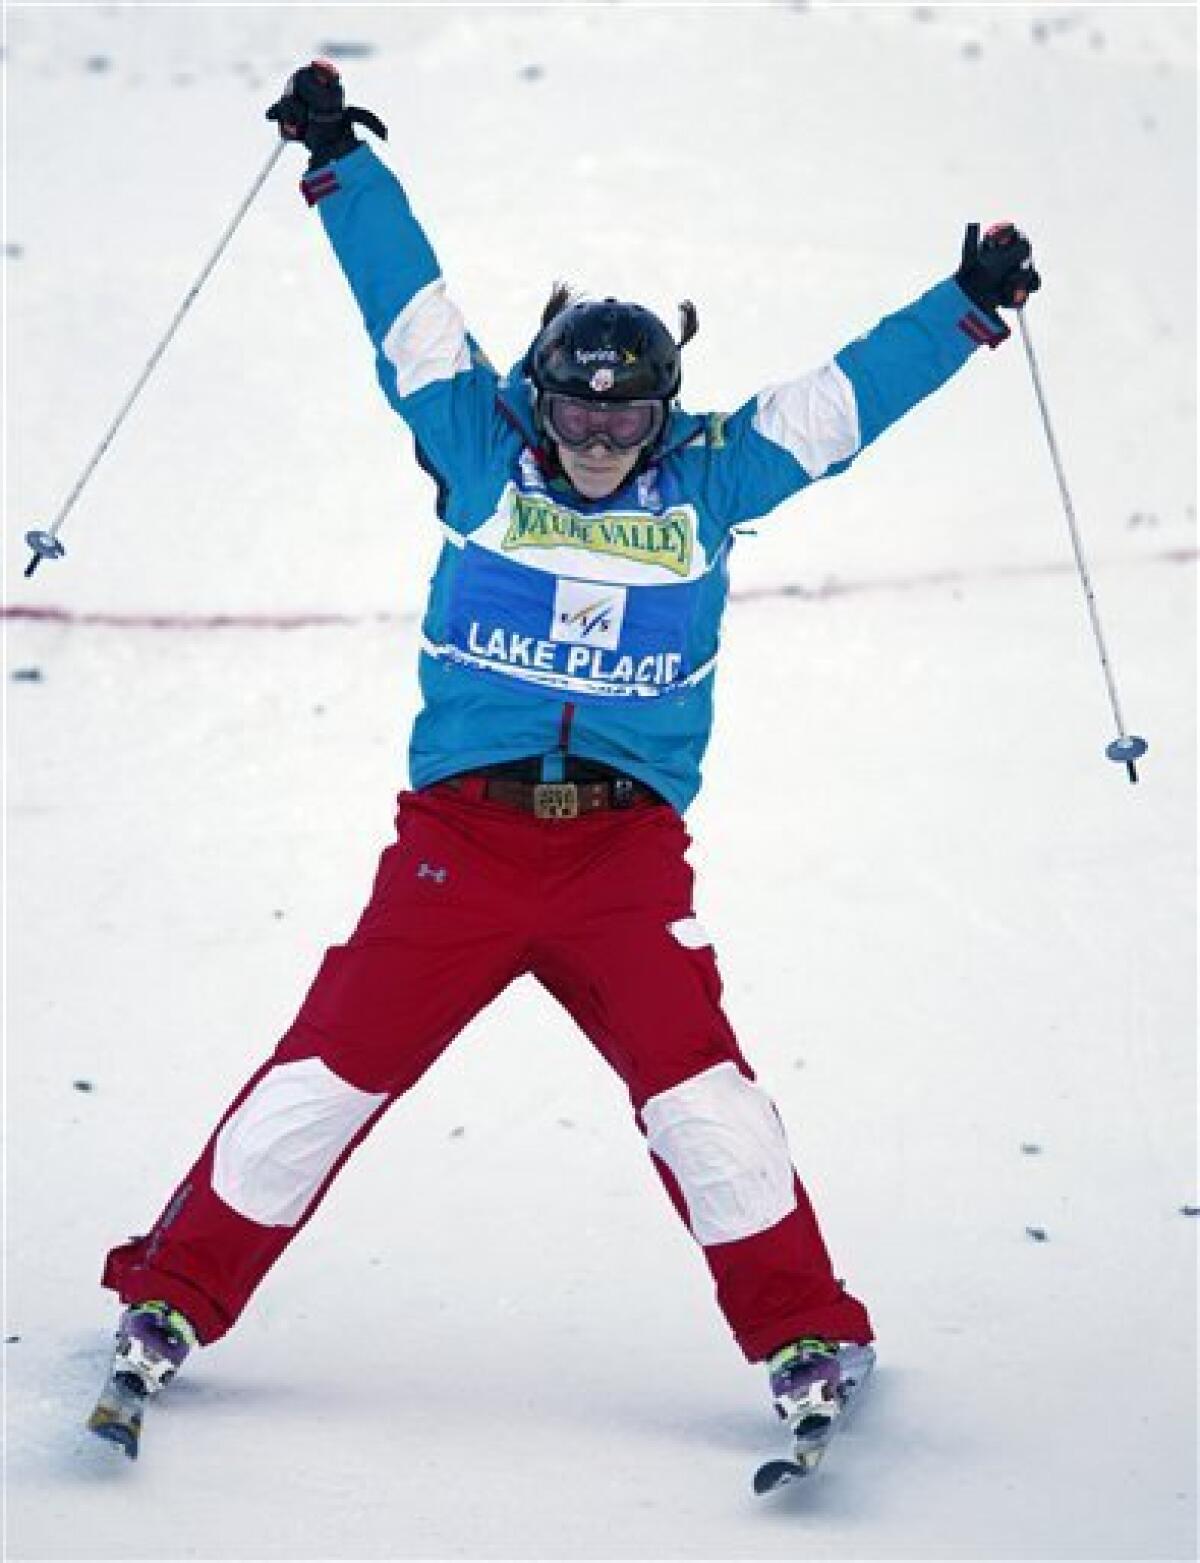 Hannah Kearney, of the United States, reacts to her first-place finish in ladies' moguls freestyle World Cup skiing event in Wilmington, N.Y., on Thursday, Jan. 21, 2010. (AP Photo/Mike Groll)